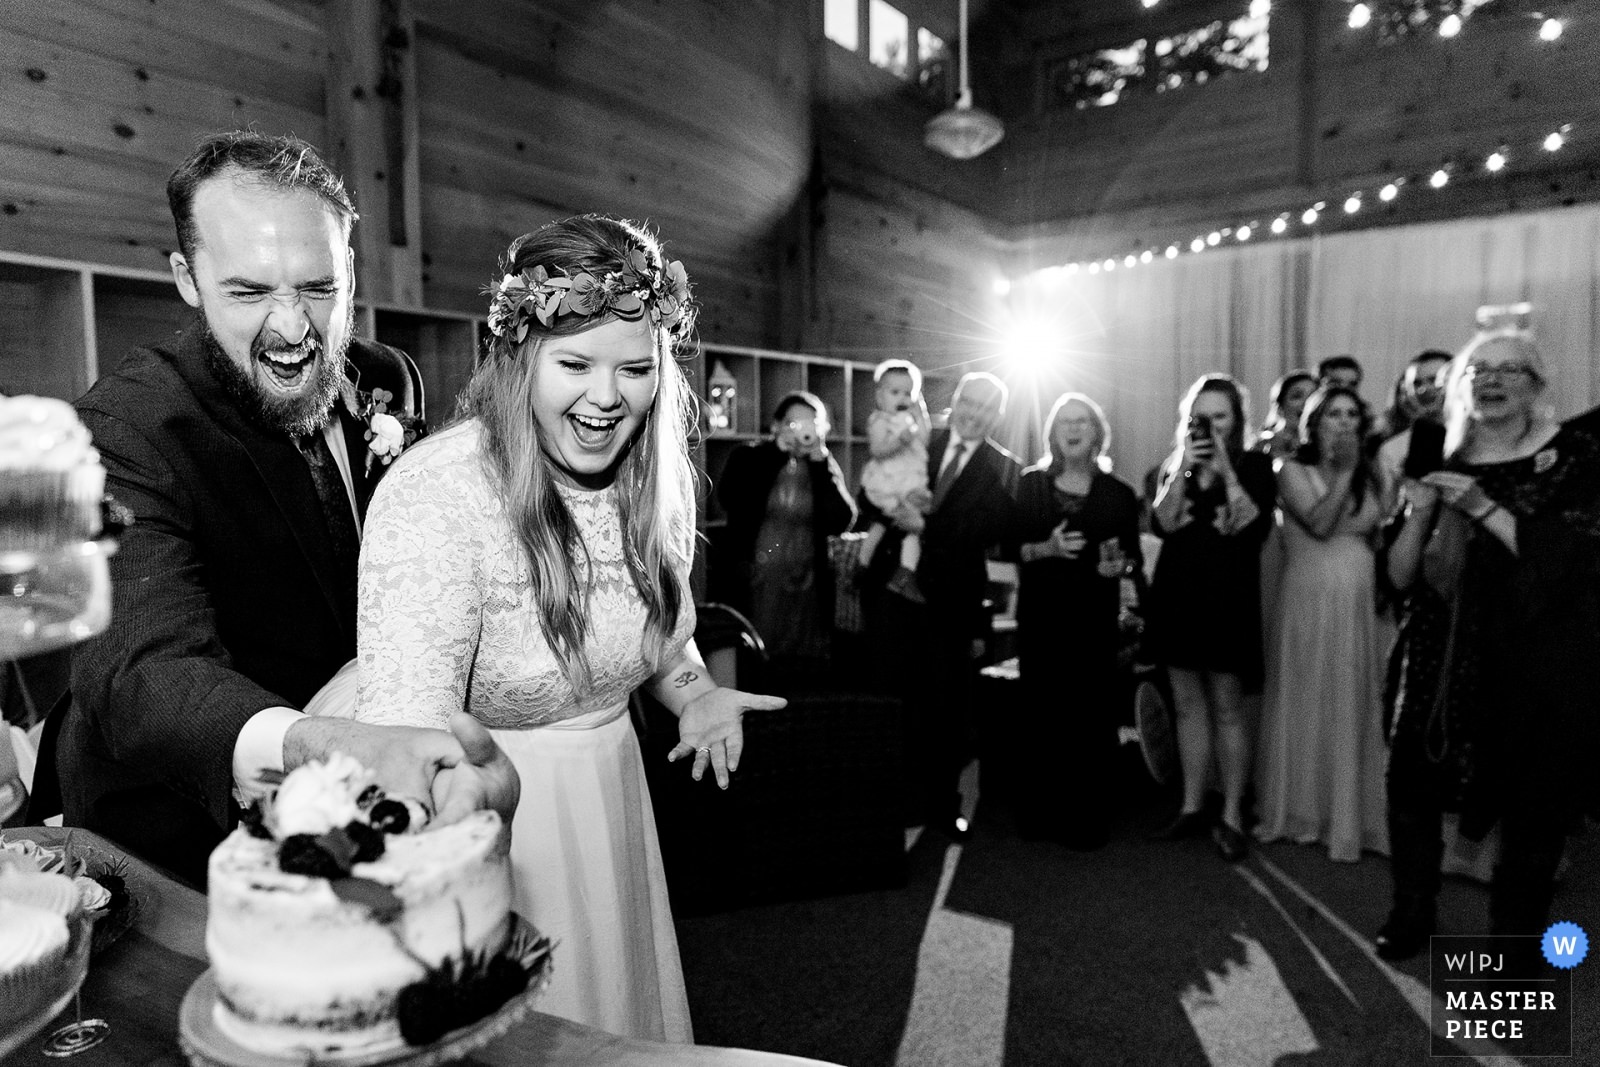 A bride and groom cut the cake at their Sugarloaf Maine wedding